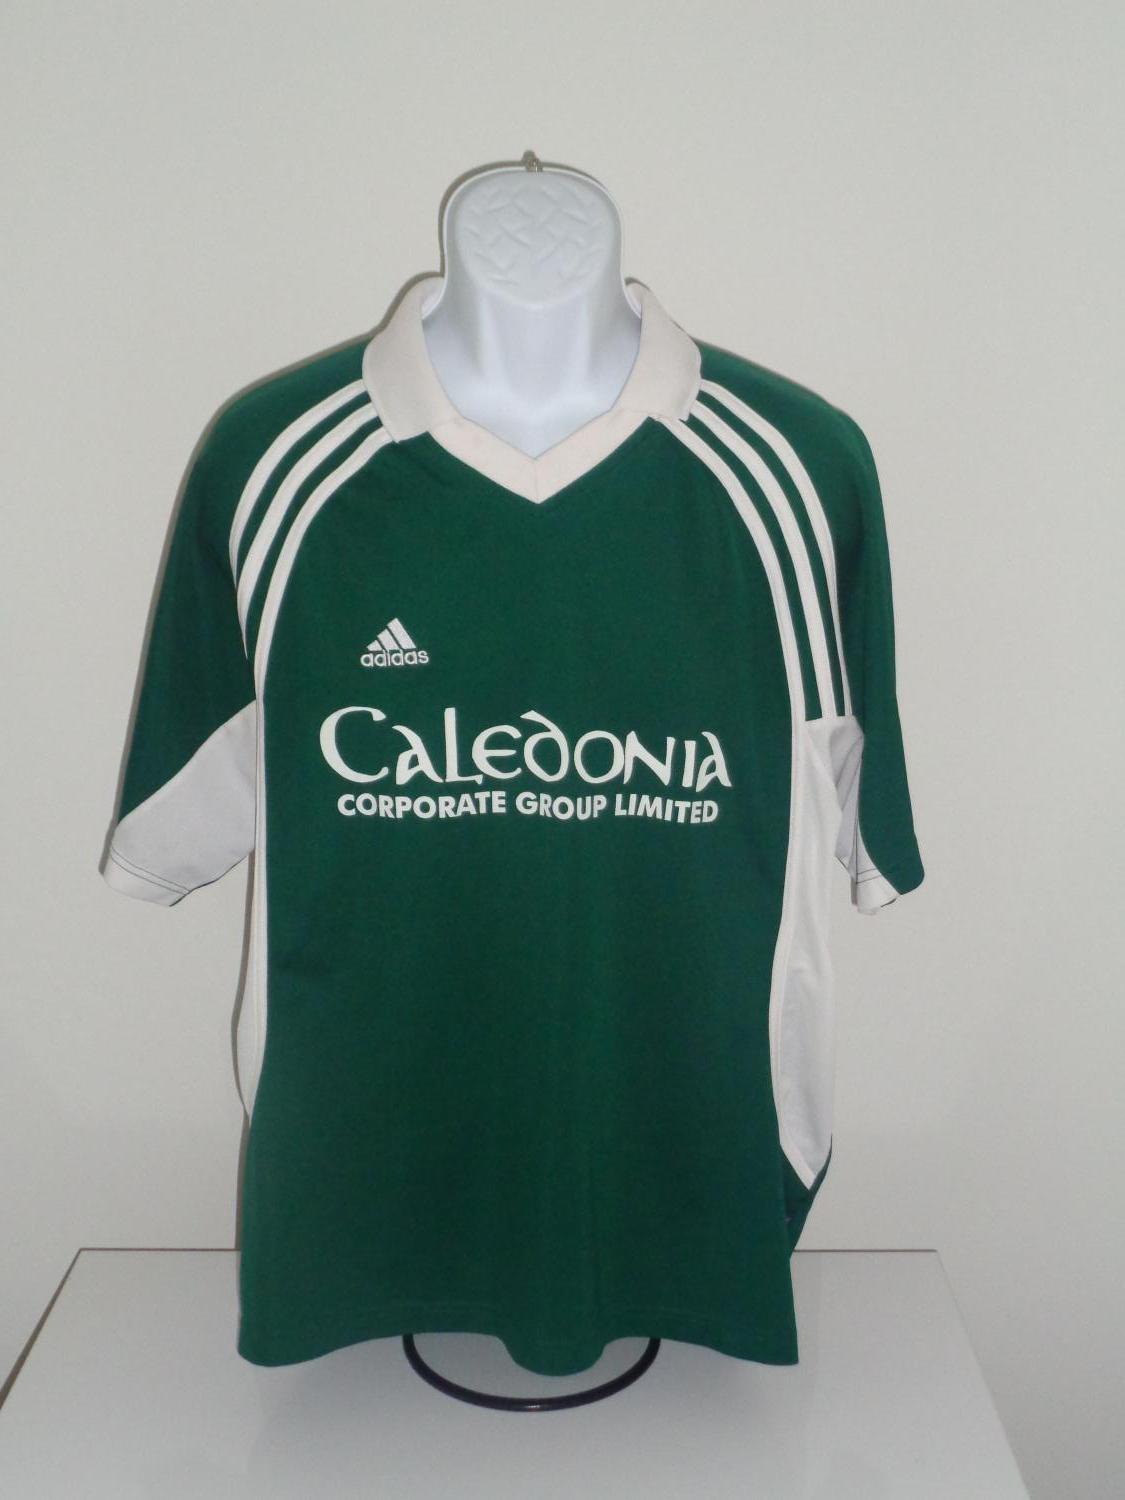 Caledonia Celtics Home football shirt (unknown year).